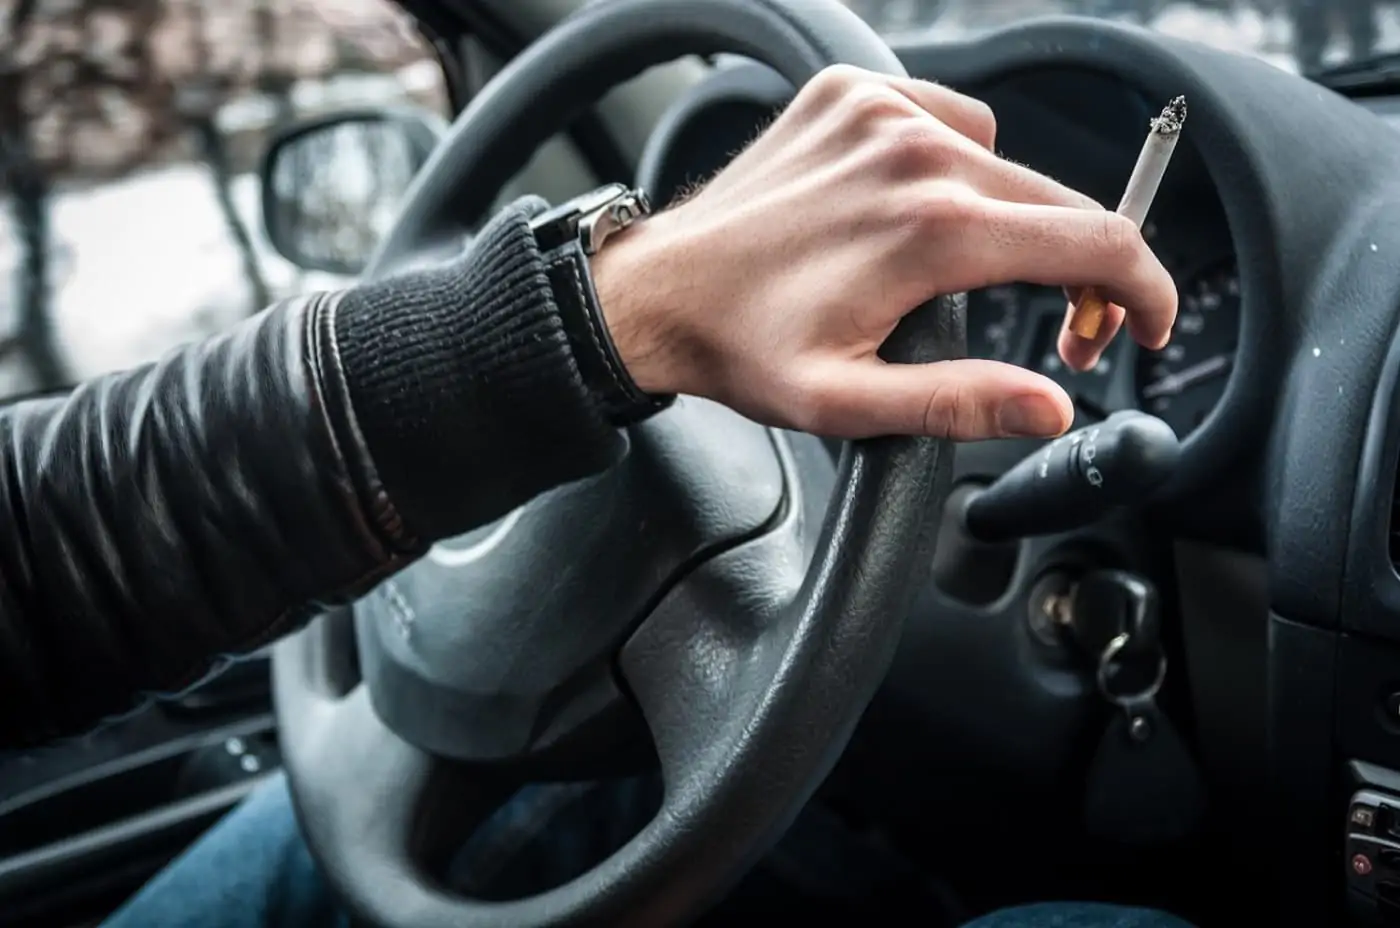 close shot of a hand on steering wheel holding a cigarette.